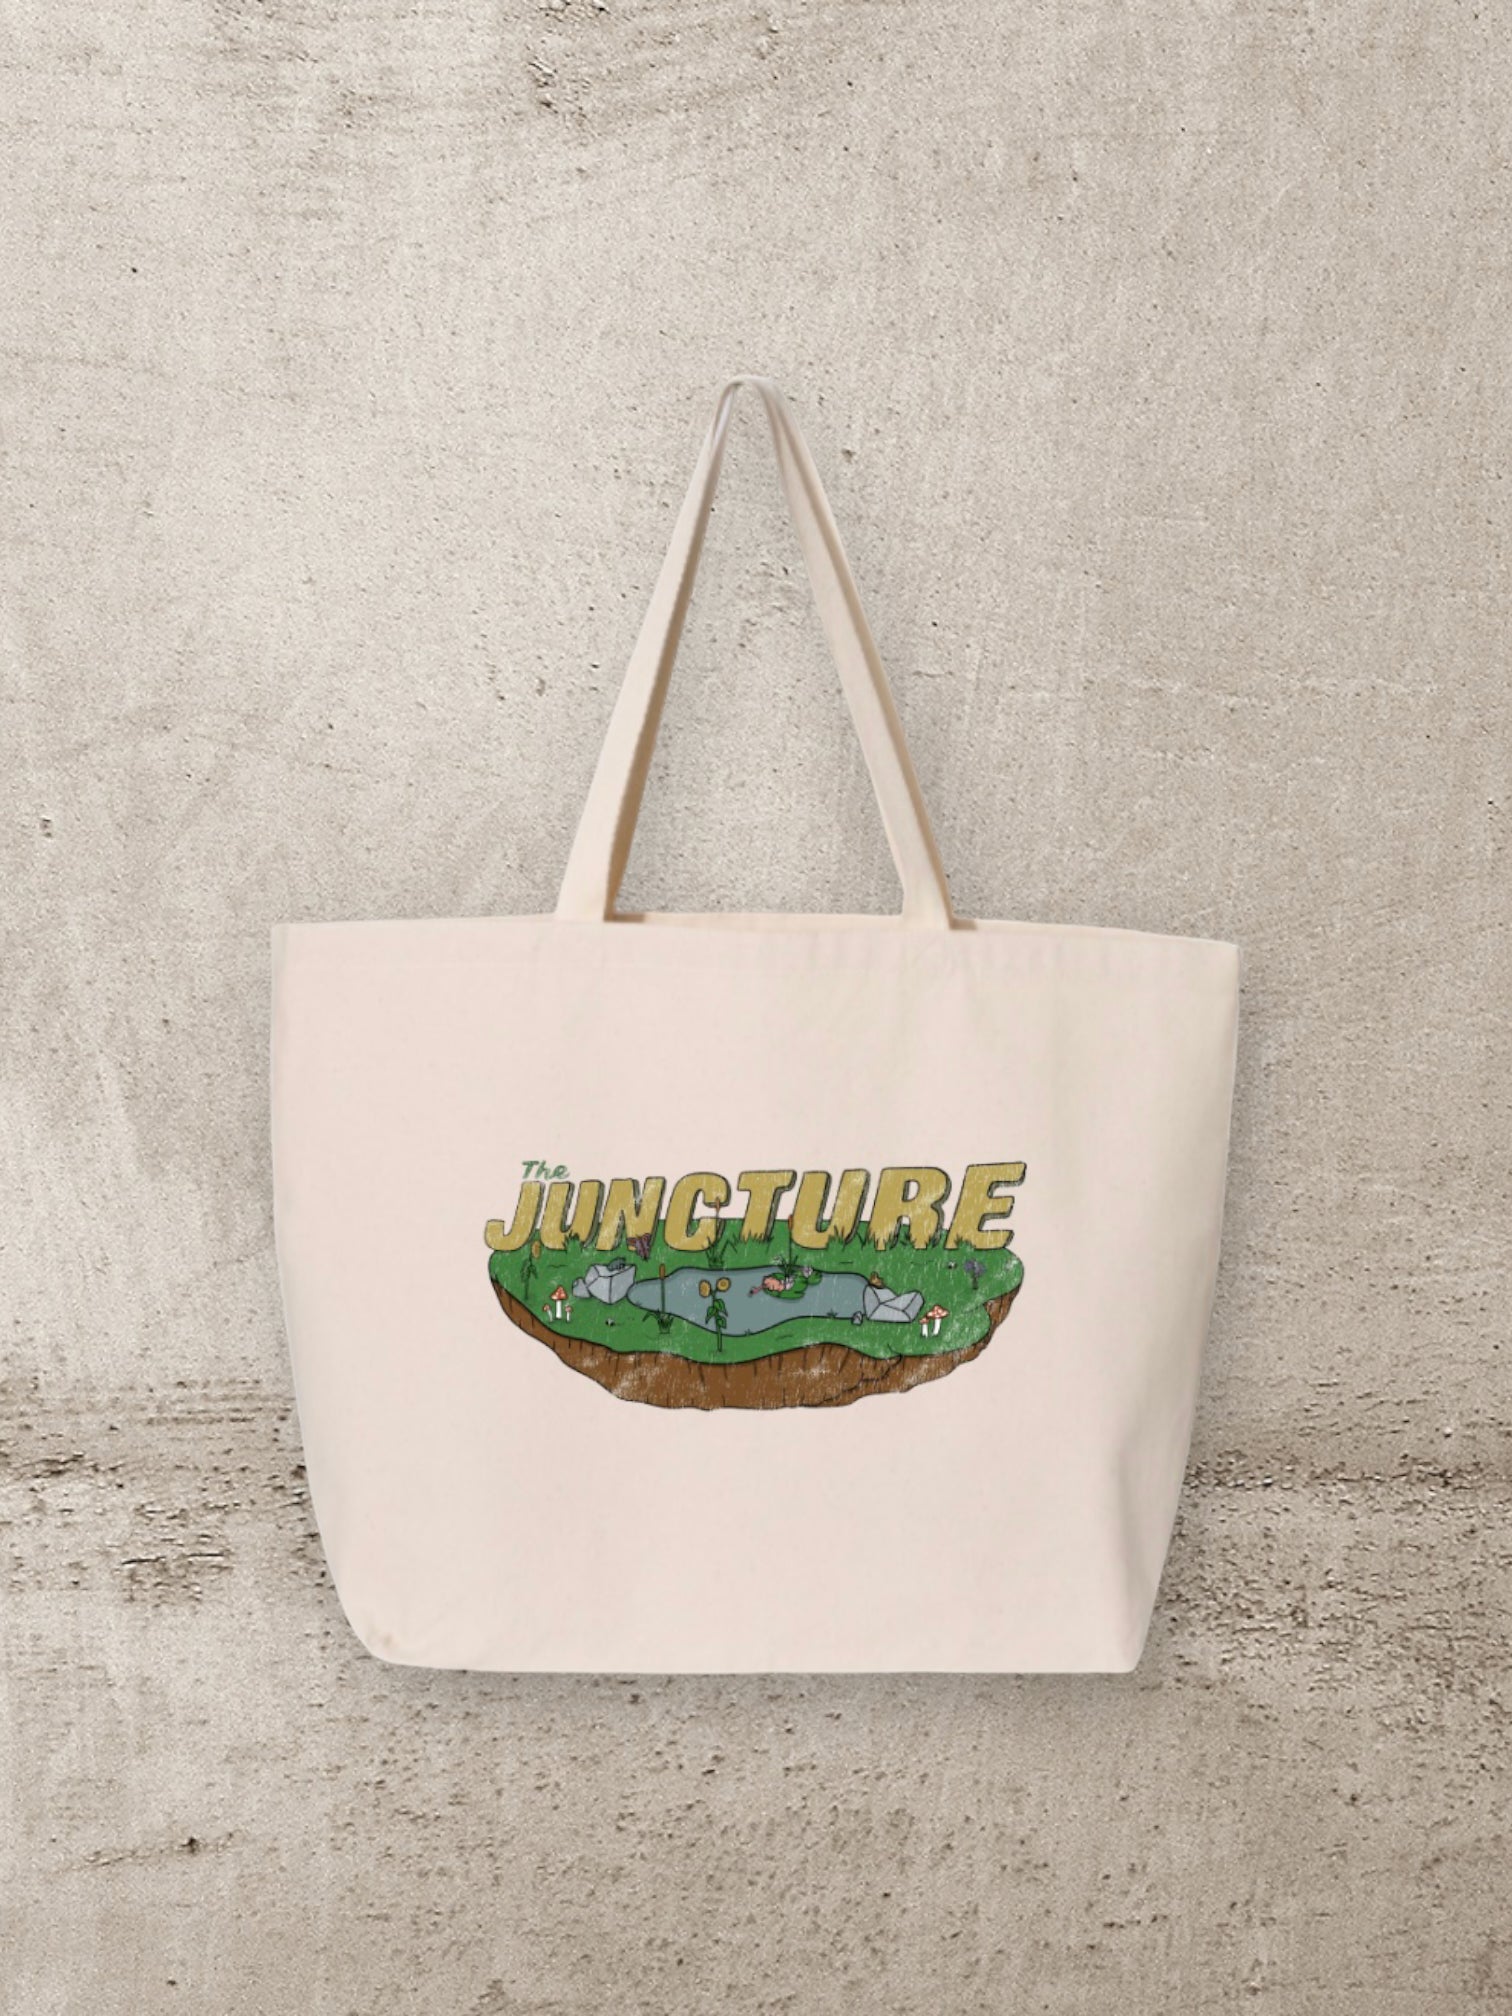 The Juncture Graphic Tote Bag